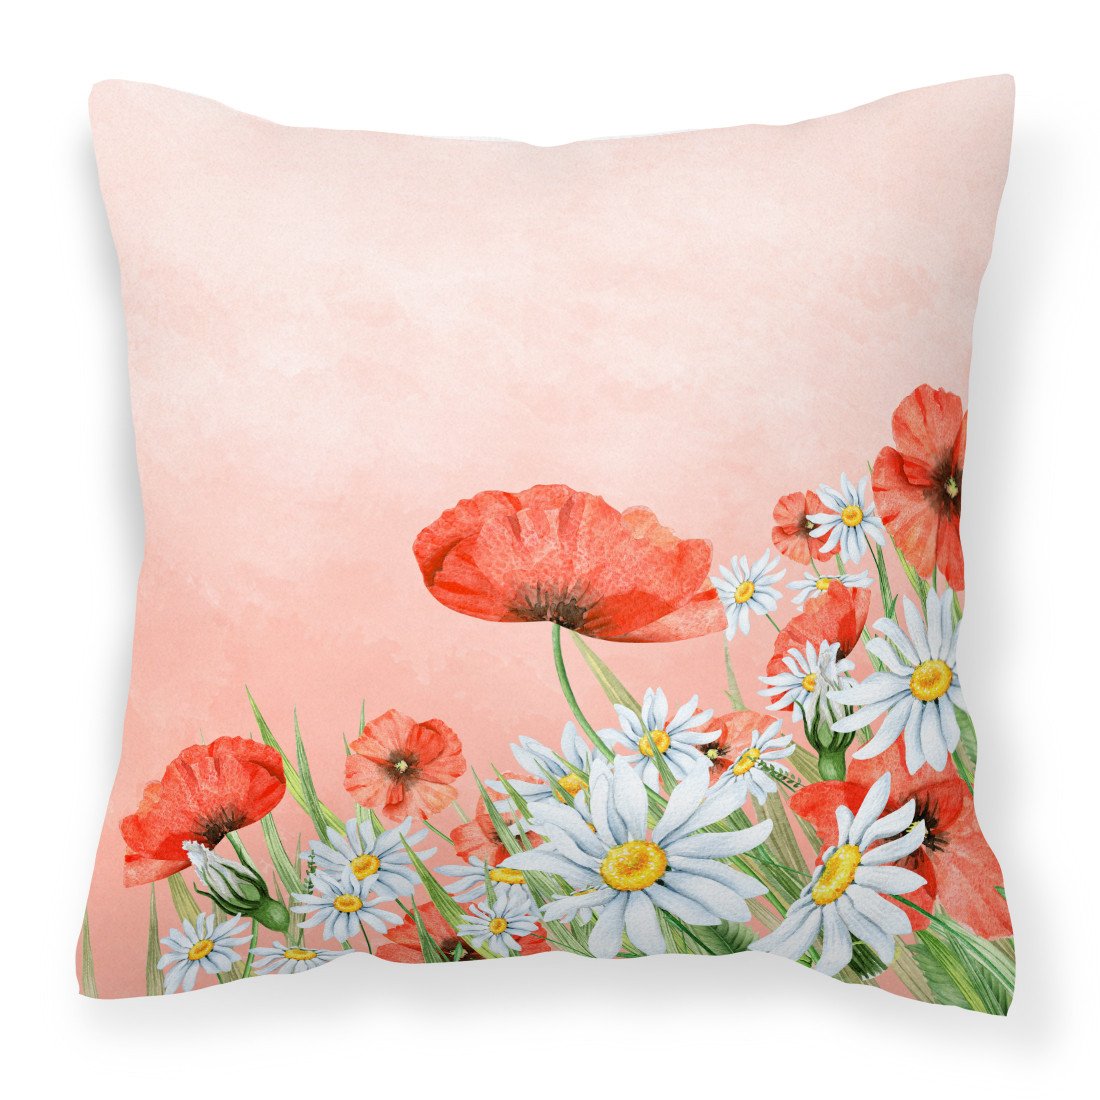 Poppies and Chamomiles Fabric Decorative Pillow BB7448PW1818 by Caroline's Treasures